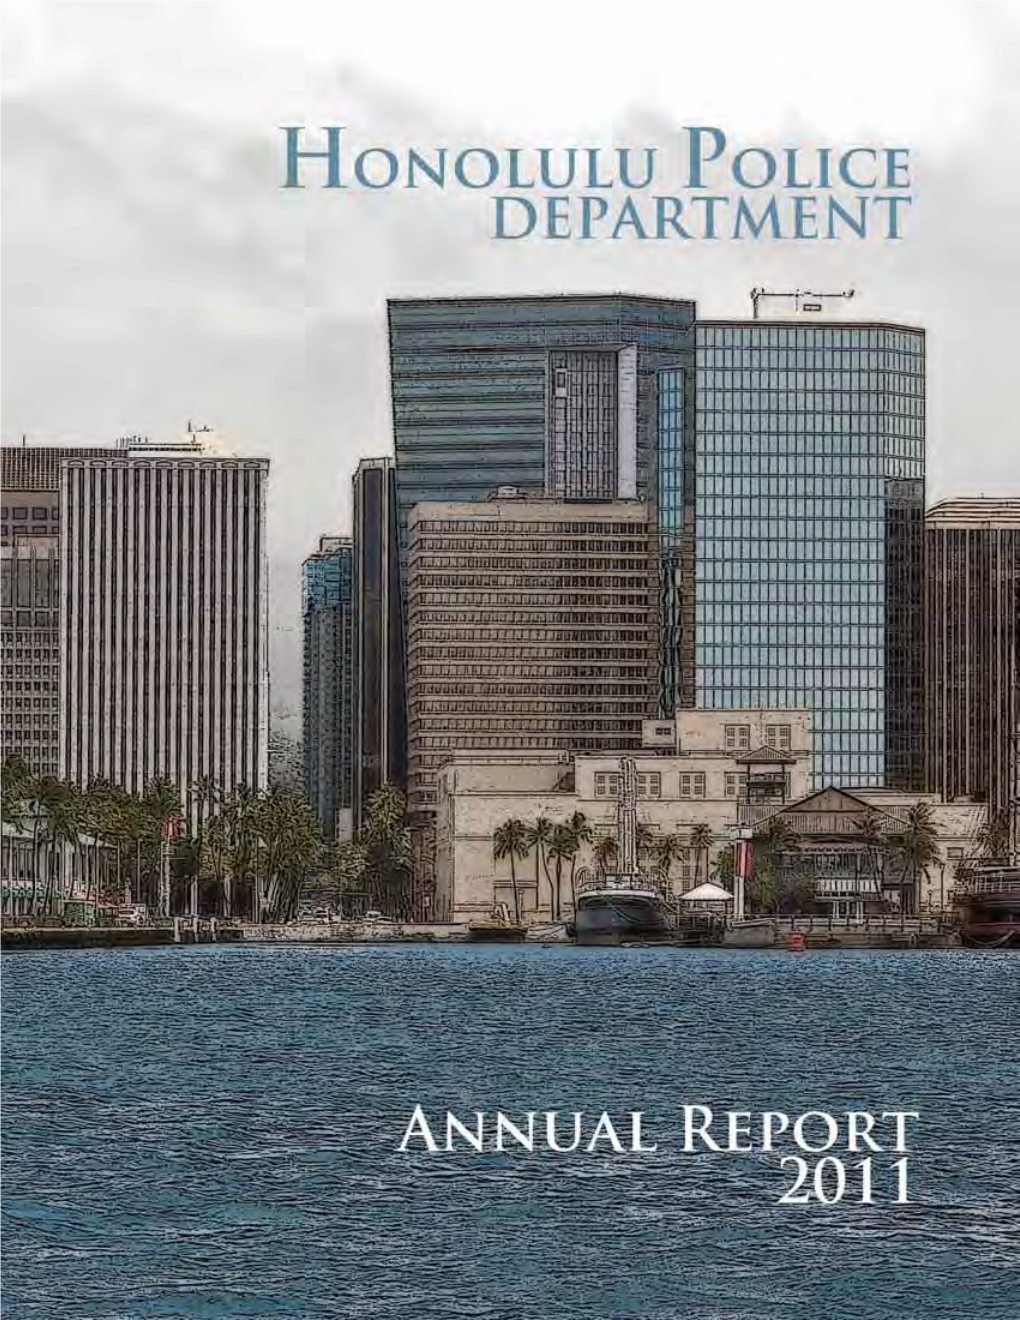 The 2011 Annual Report